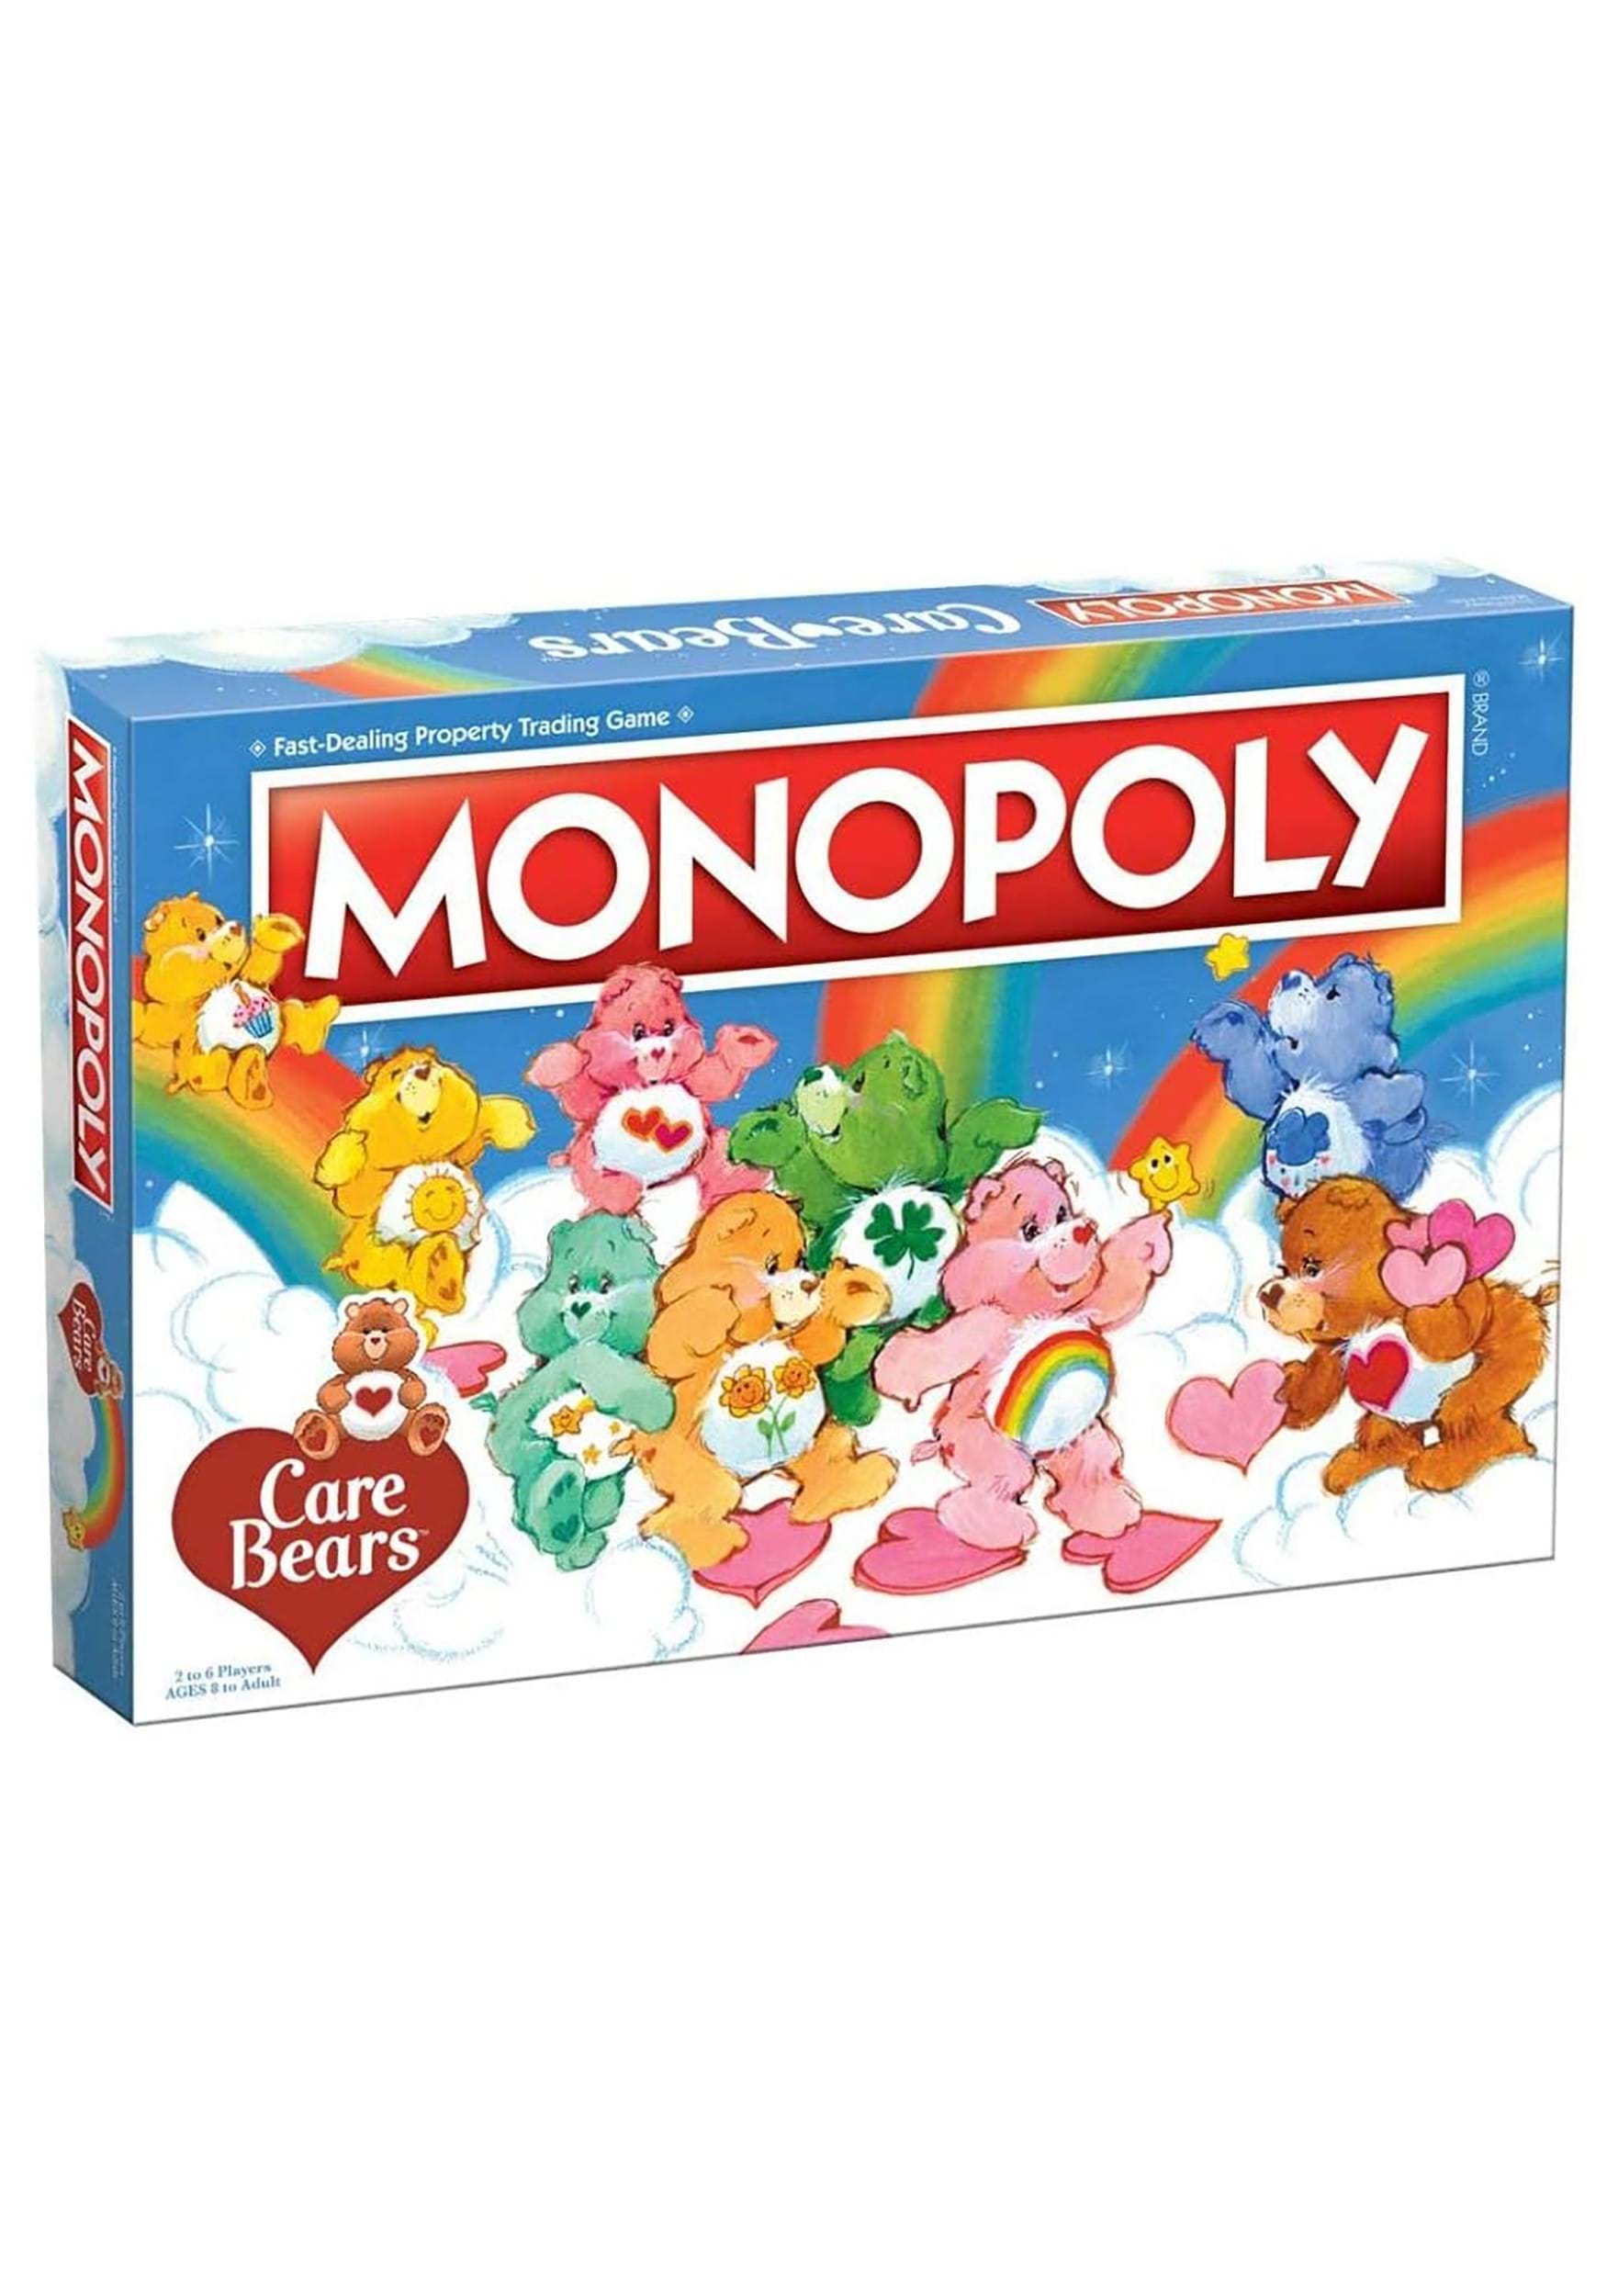 Care Bears MONOPOLY Board Game